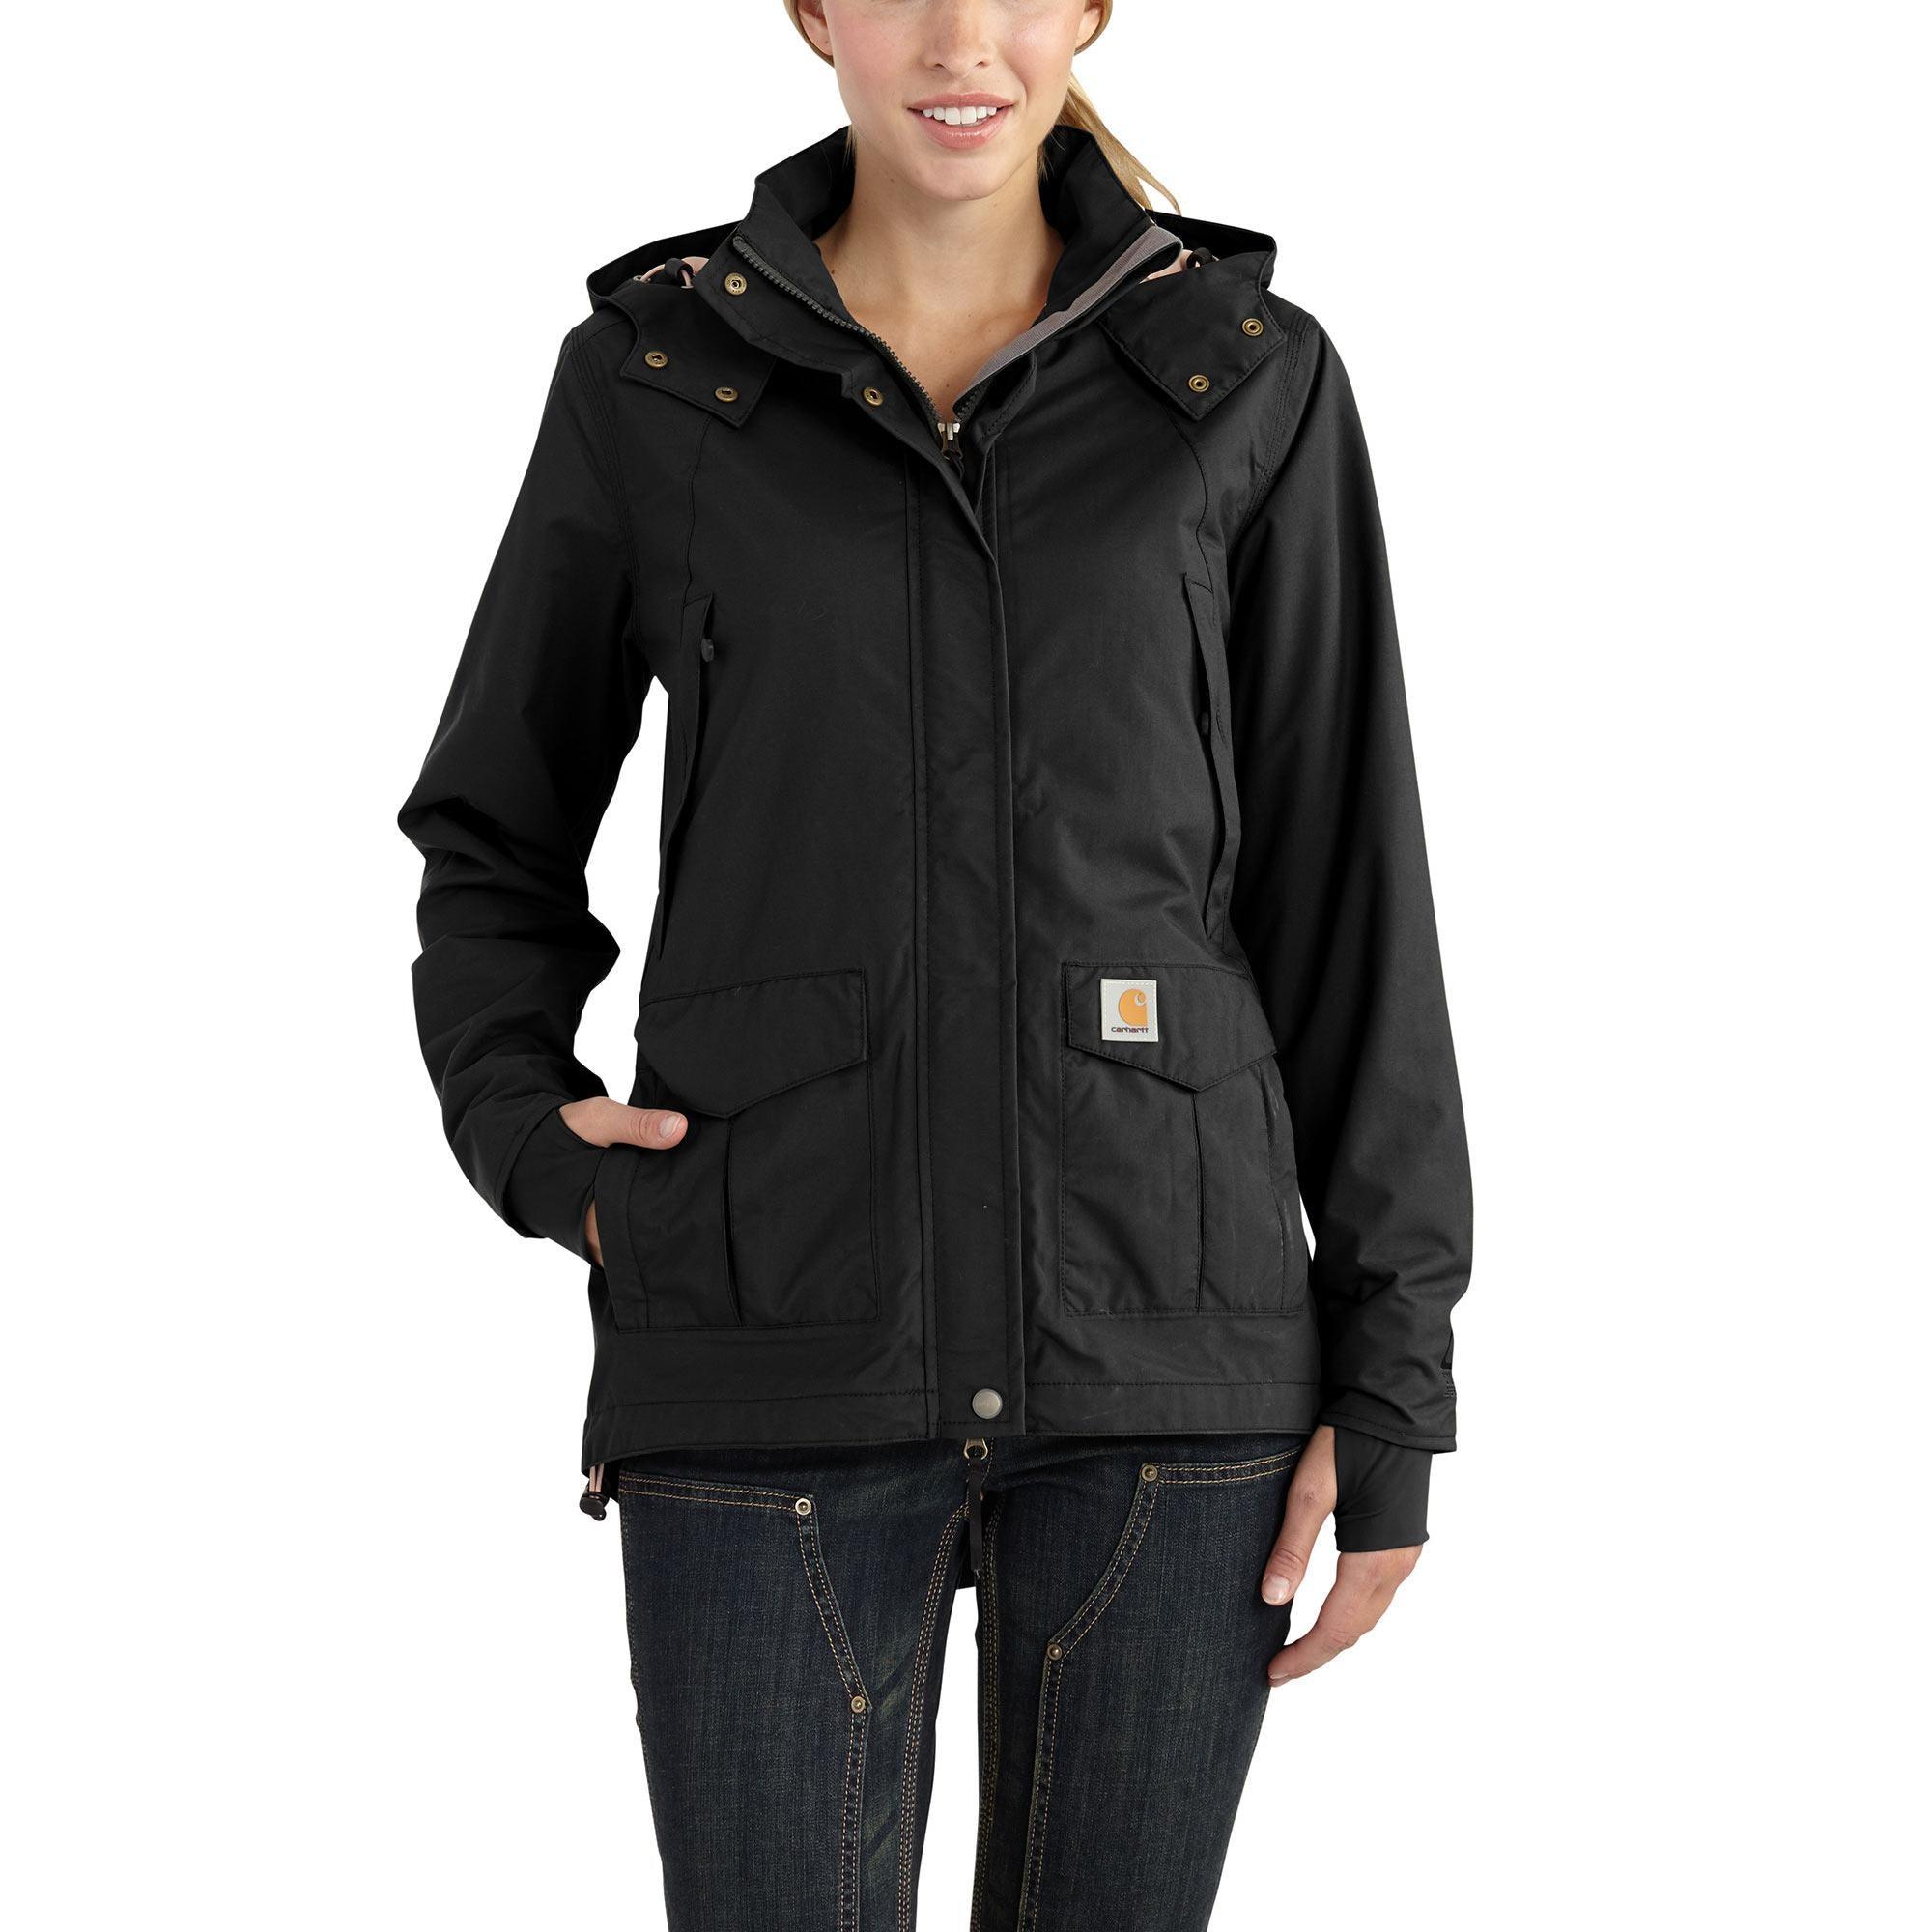 Women's Storm Defender Relaxed Fit Heavyweight Jacket - Black